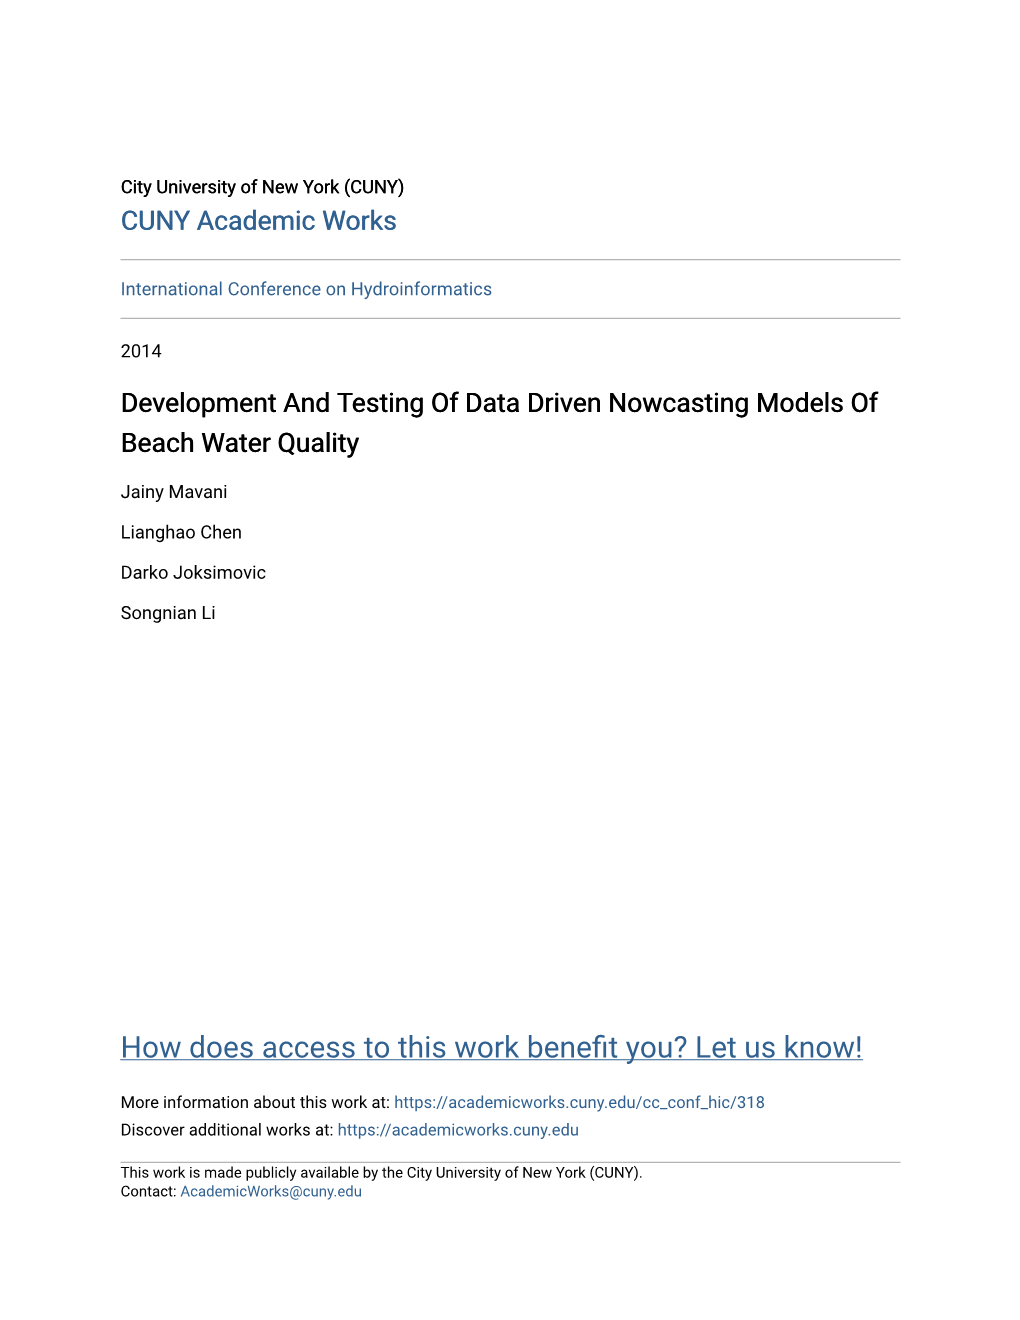 Development and Testing of Data Driven Nowcasting Models of Beach Water Quality